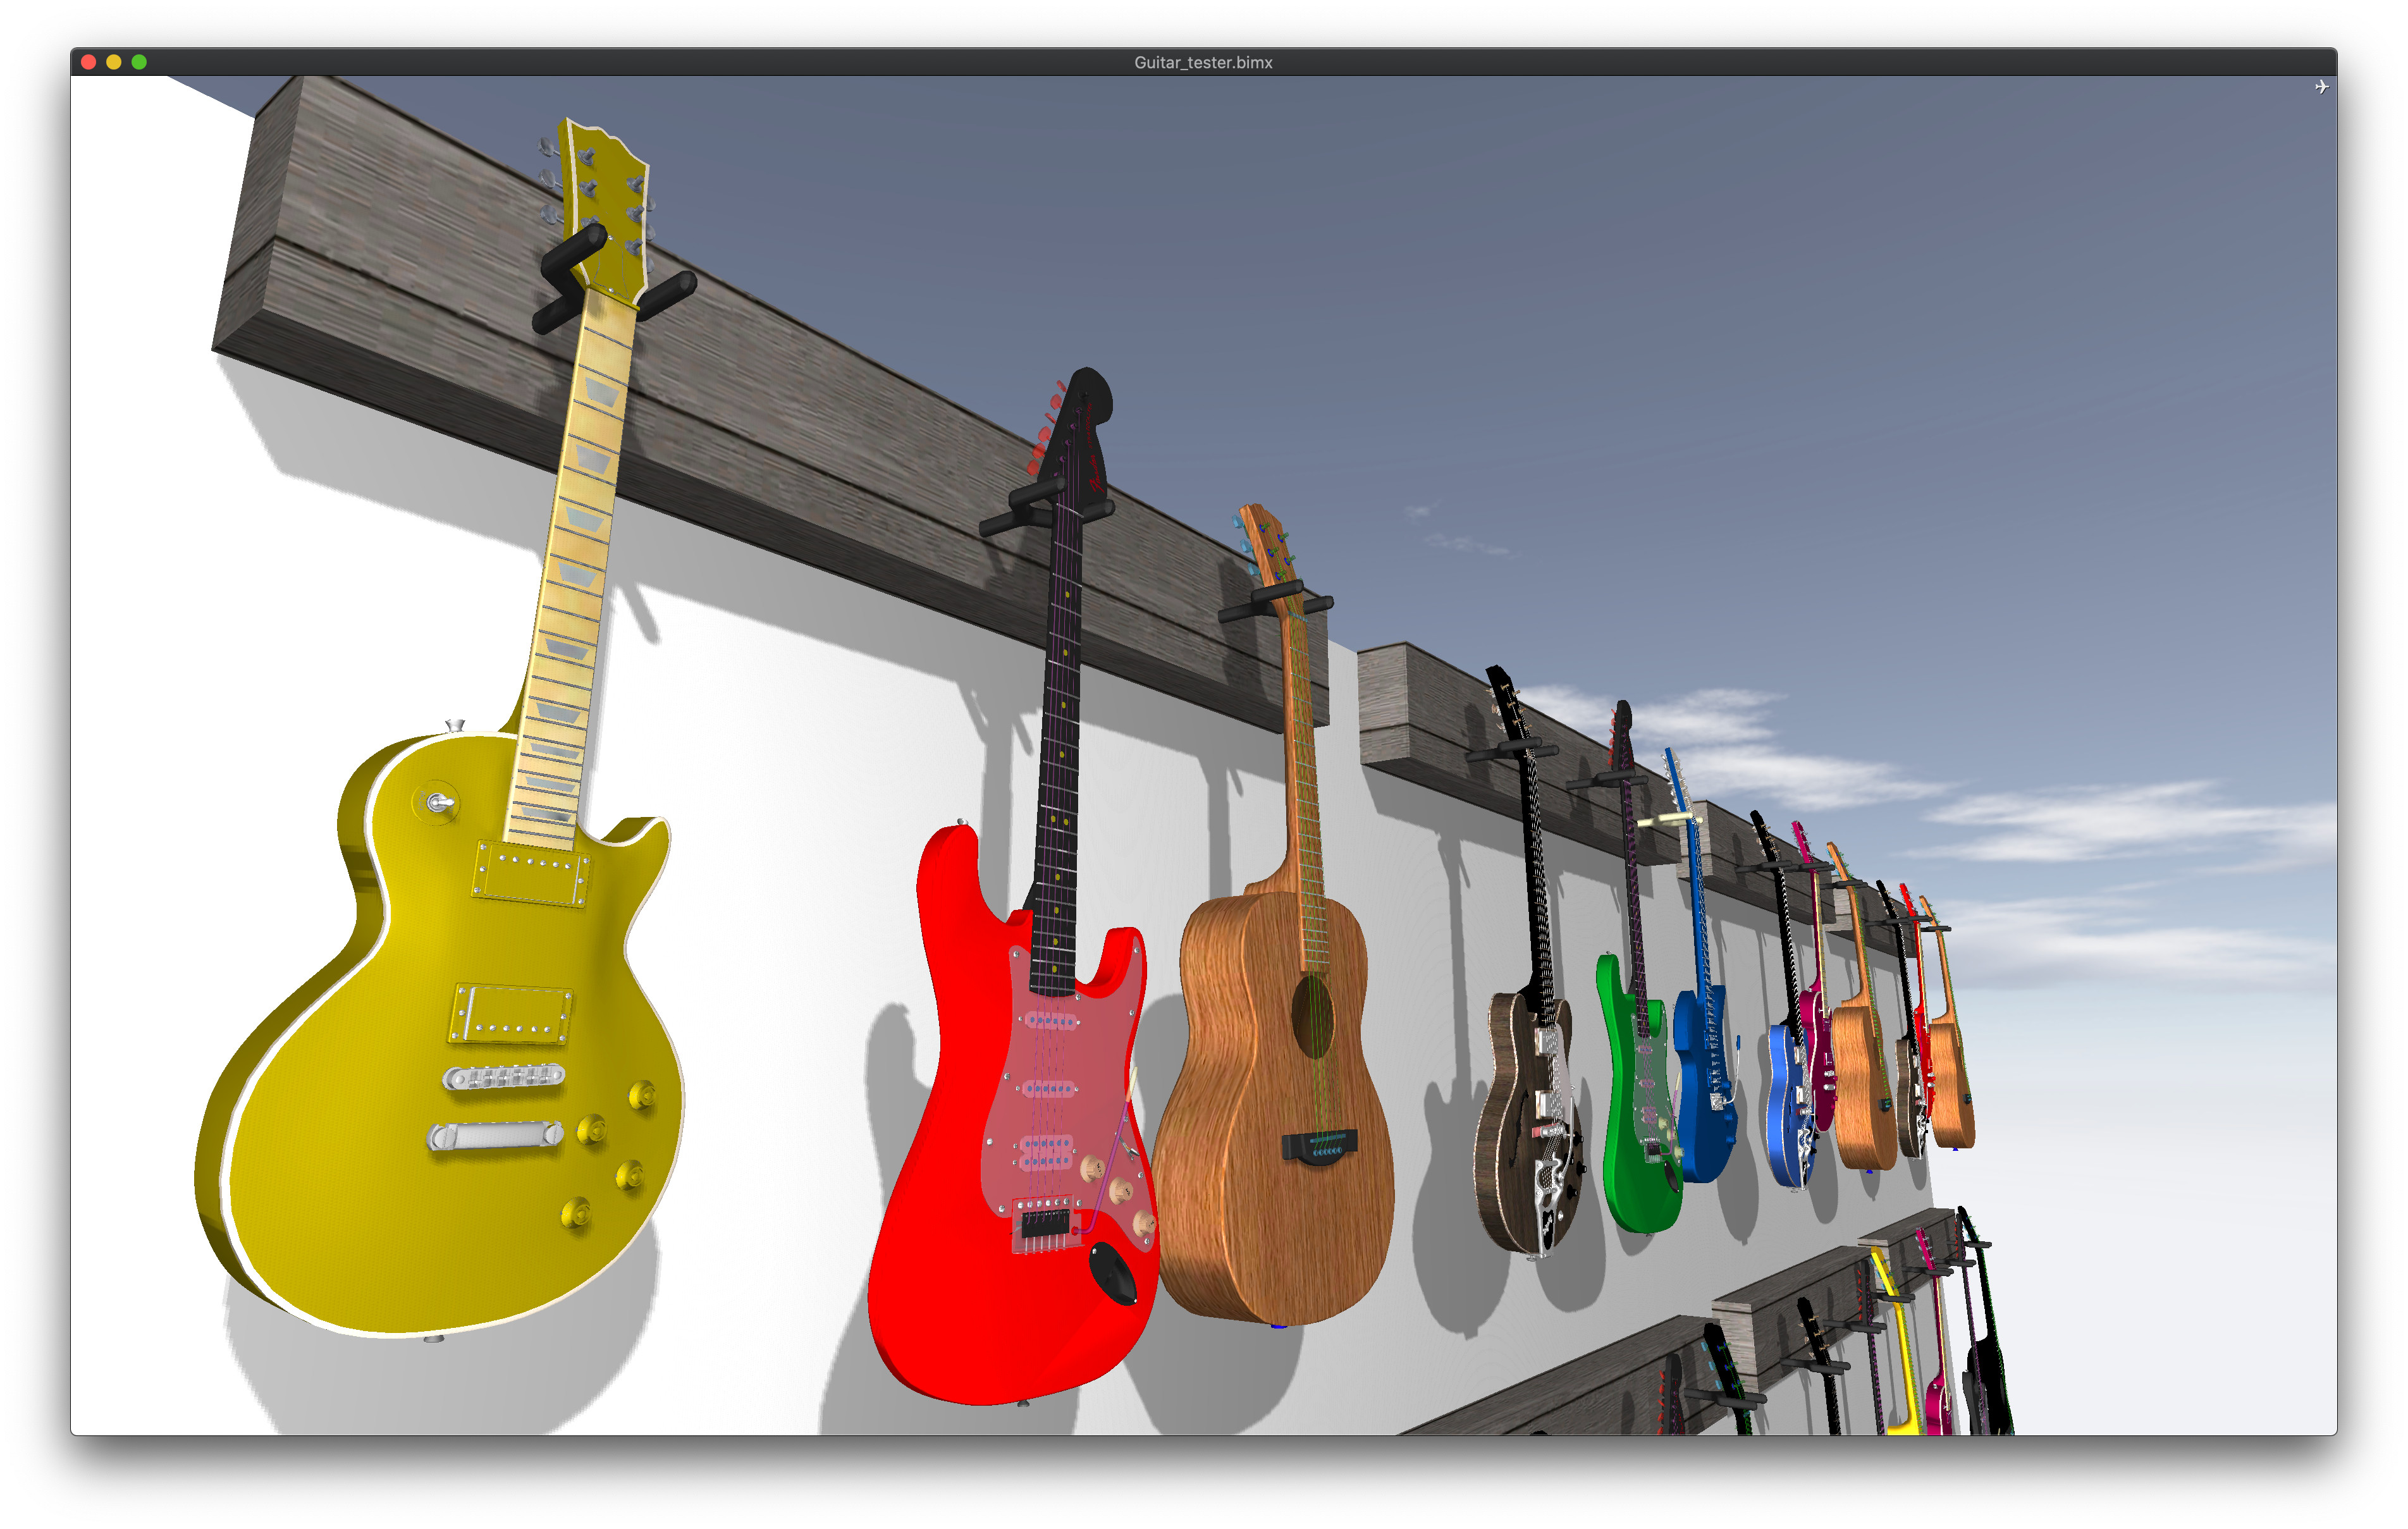 Here is a view of the same wall of guitars in BIMx viewer - looks pretty decent despite BIMx low-fi 3D engine.